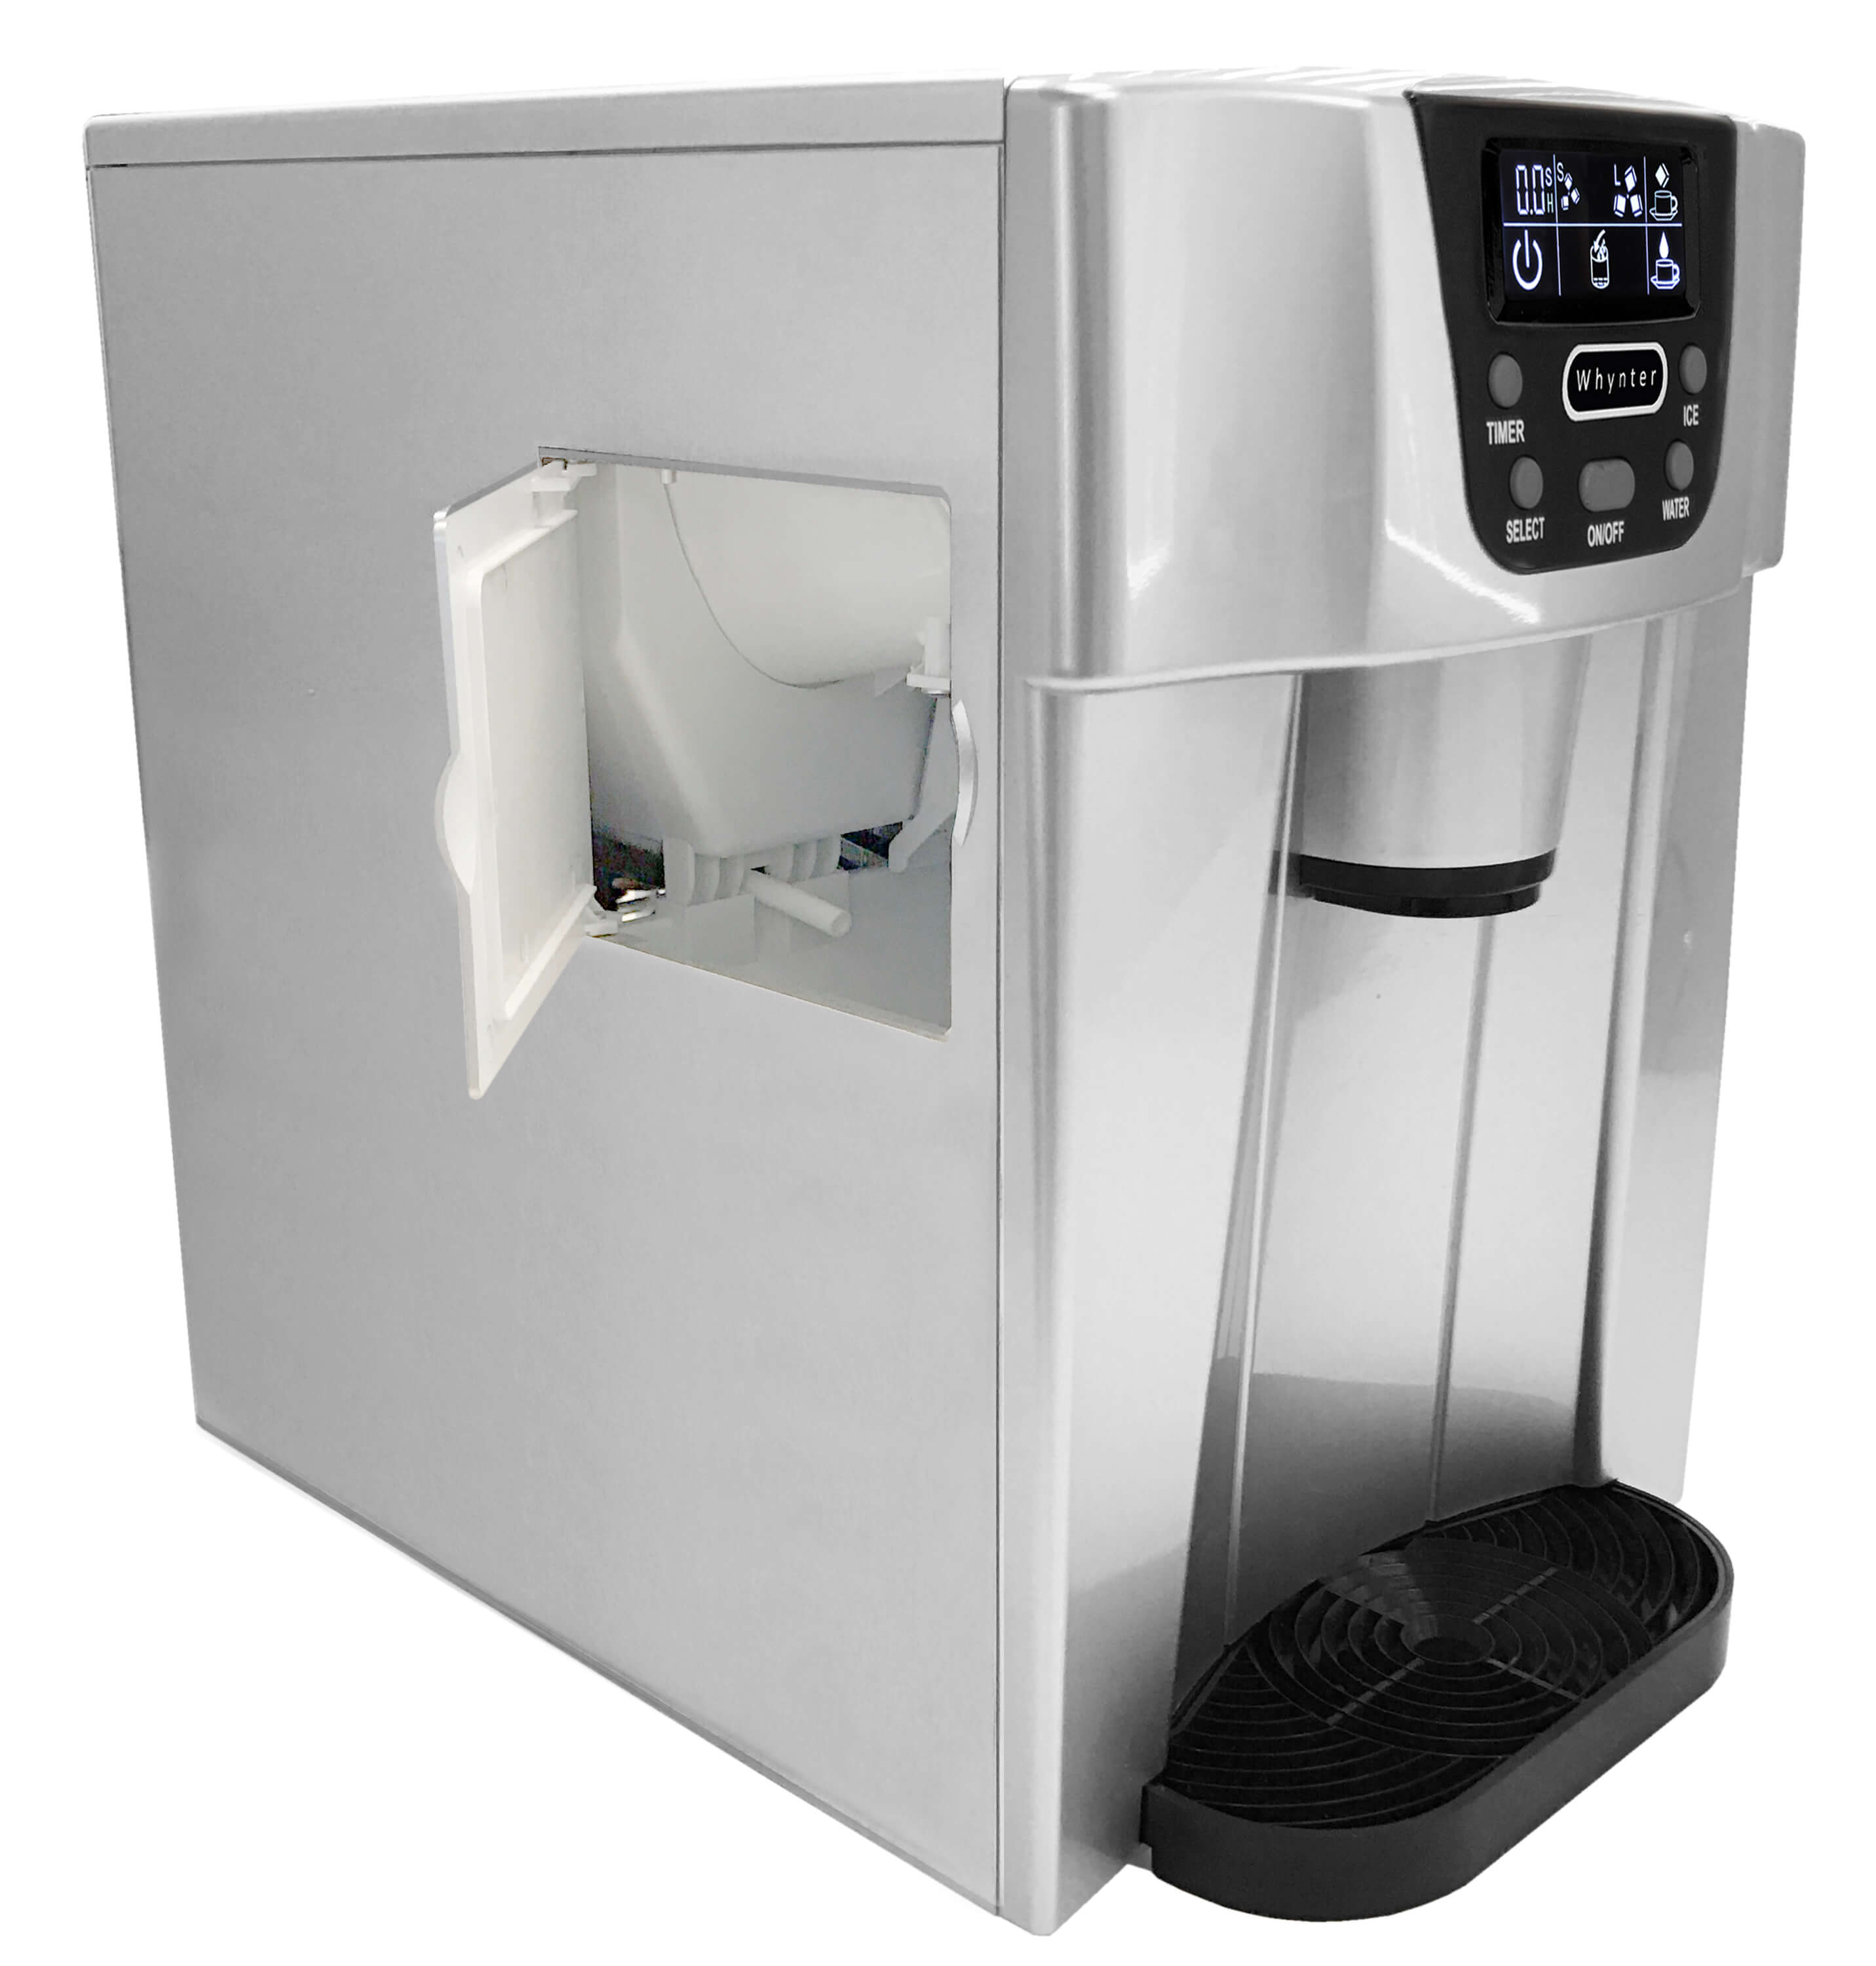 2-in-1 Stainless Steel Countertop Ice Maker with Water Dispenser